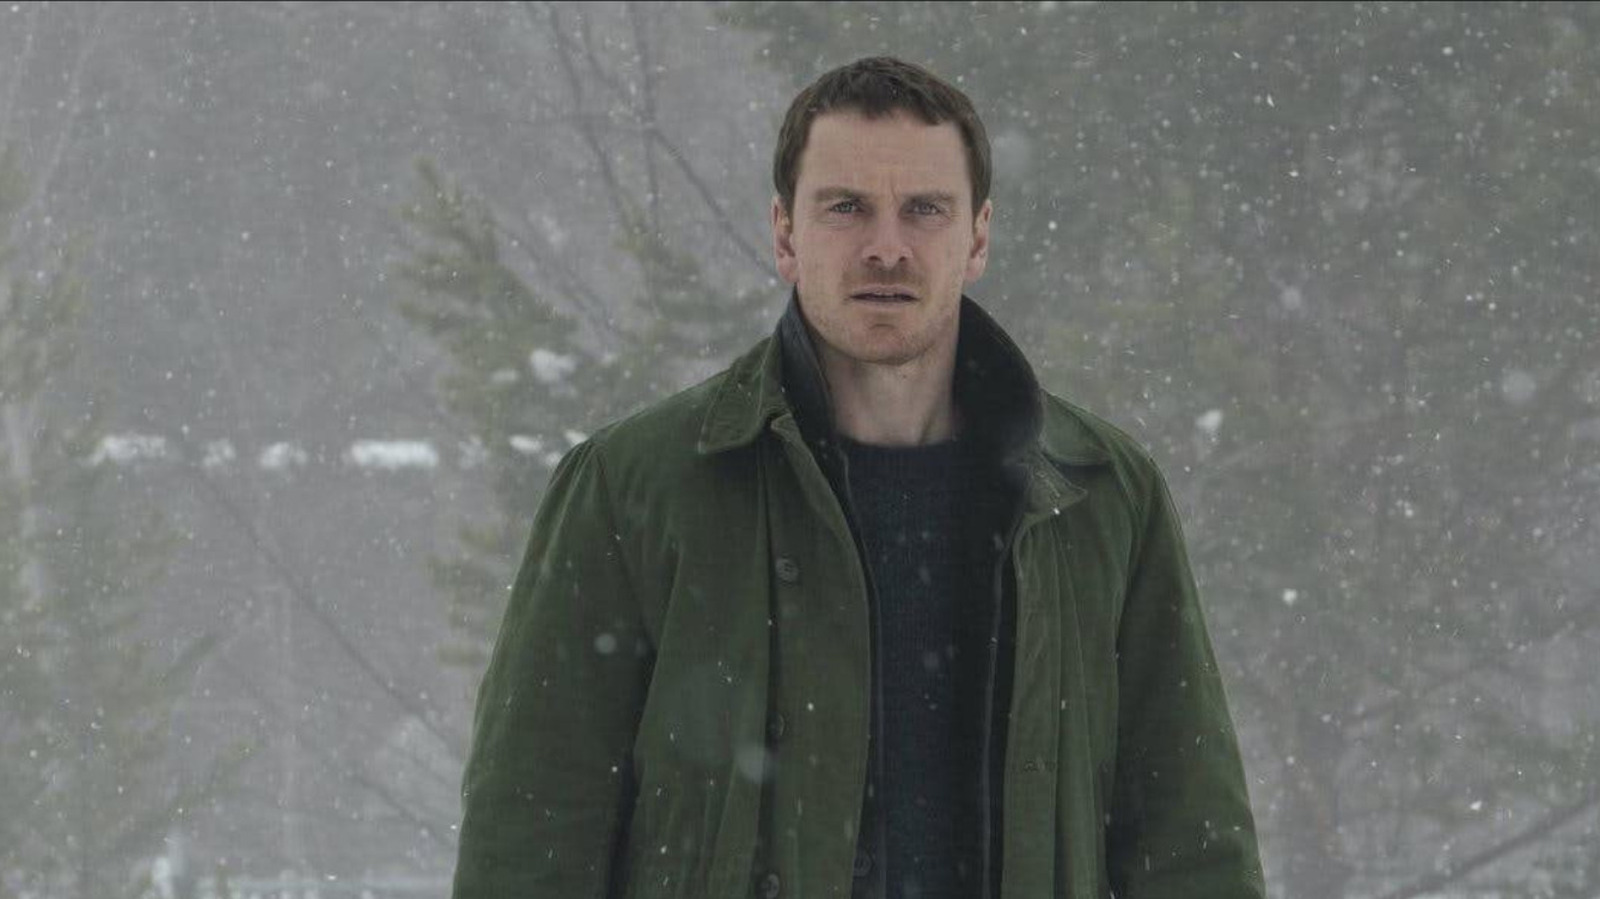 Michael Fassbender’s Notoriously Horrifying Snowman Proves Netflix Users Will Watch Anything